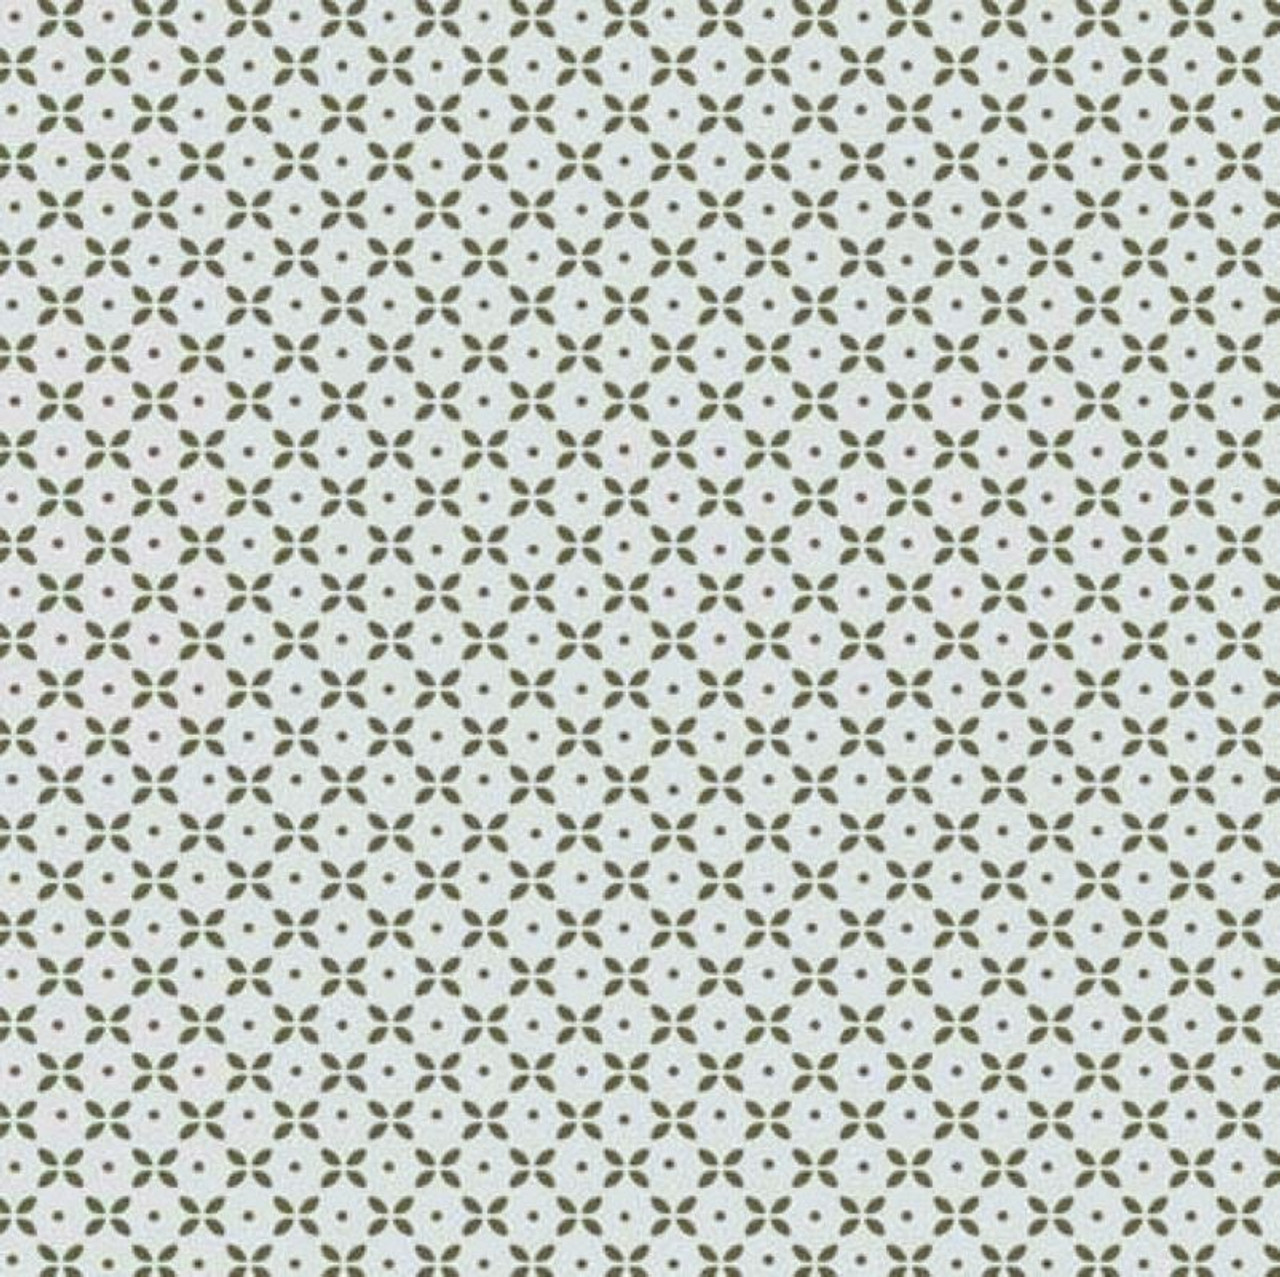 Stof European Nellie's Shirtings Flower Dots Green Quilting Cotton Fabric By The Yard